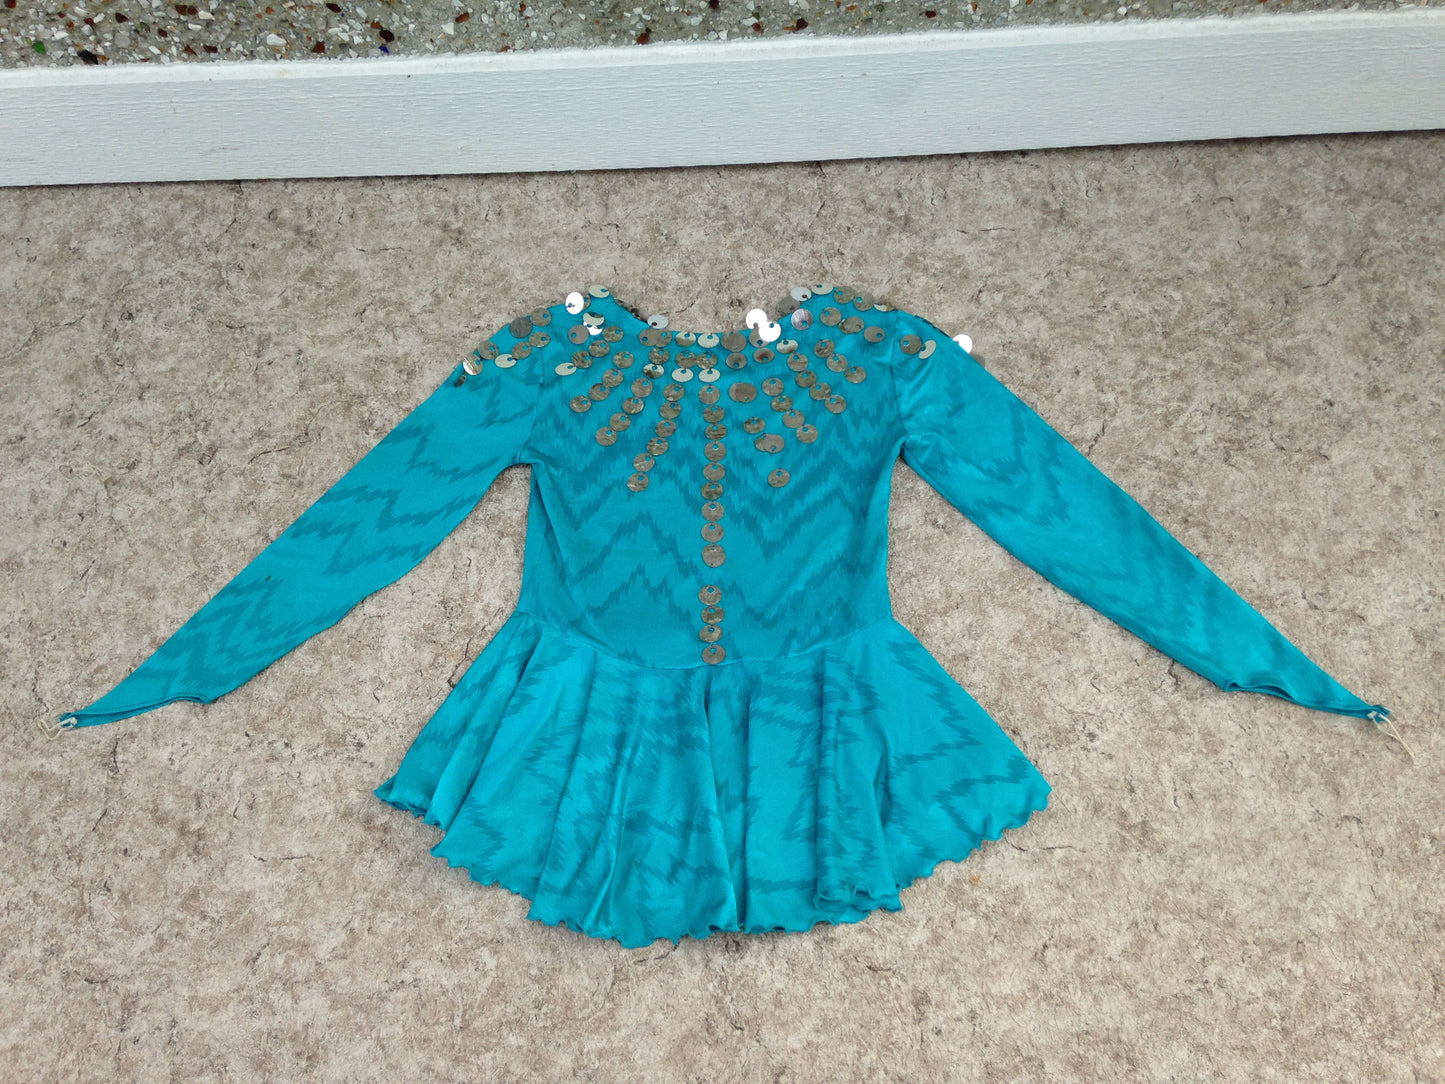 Figure Skating Dress Child Size 12 Brilliant Blue With Sequences Excellent